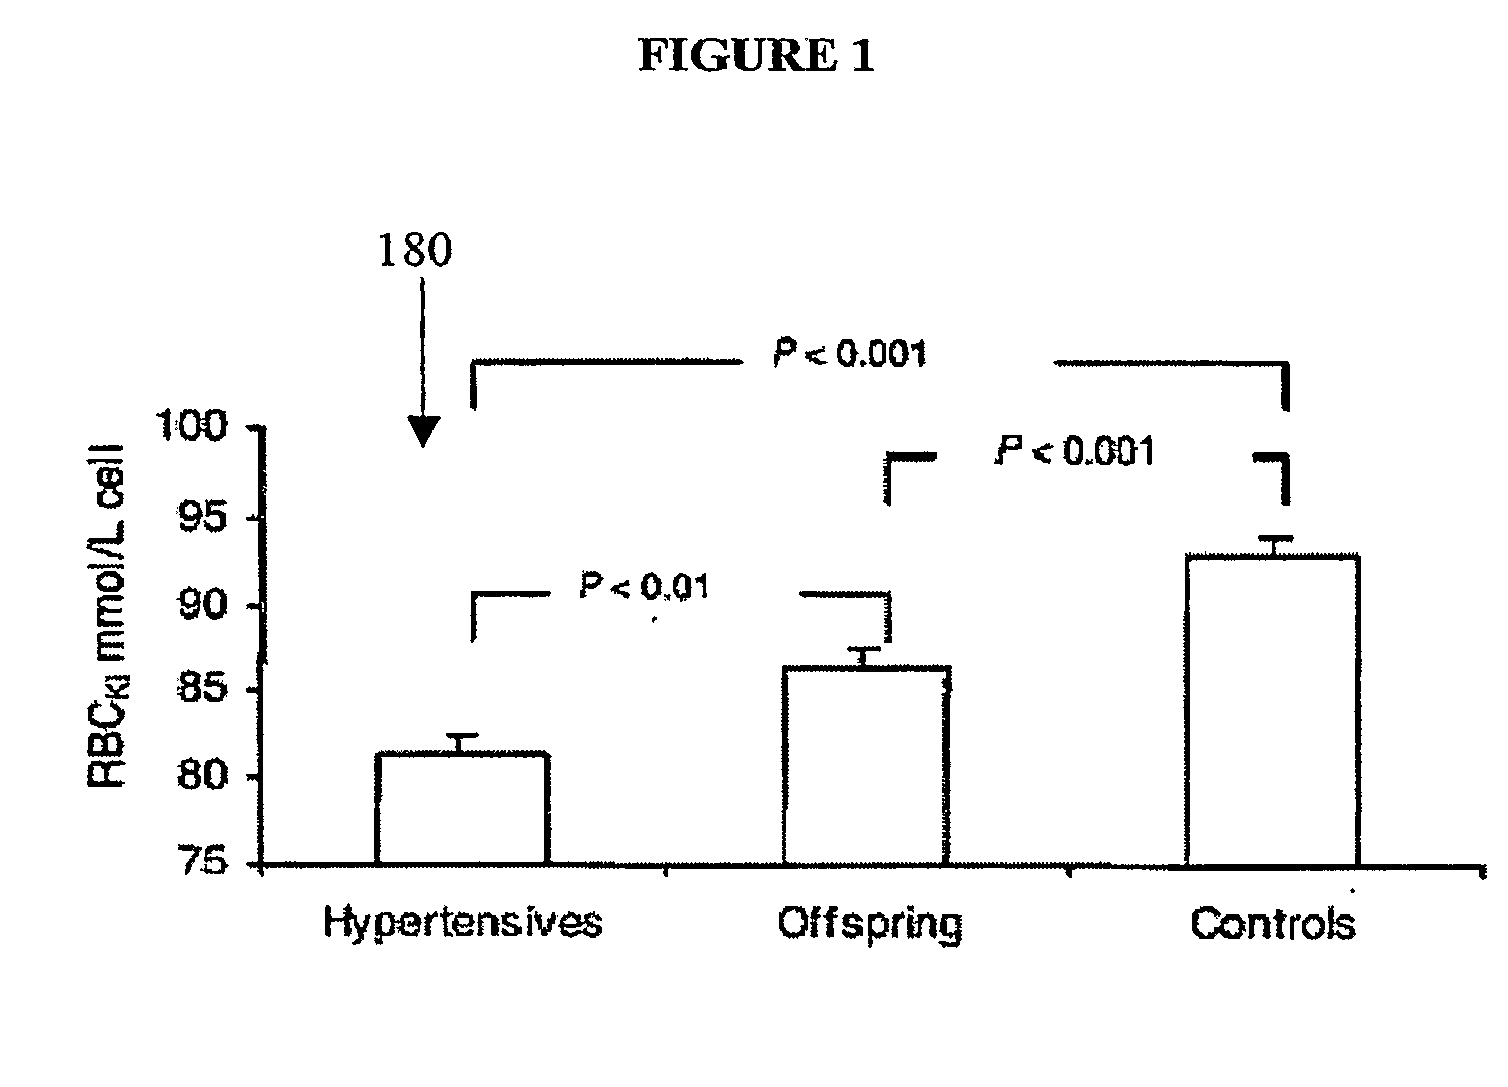 Method for the Diagnosis and Treatment of Conditions Involving Aberrant Erythrocyte Potassium Levels